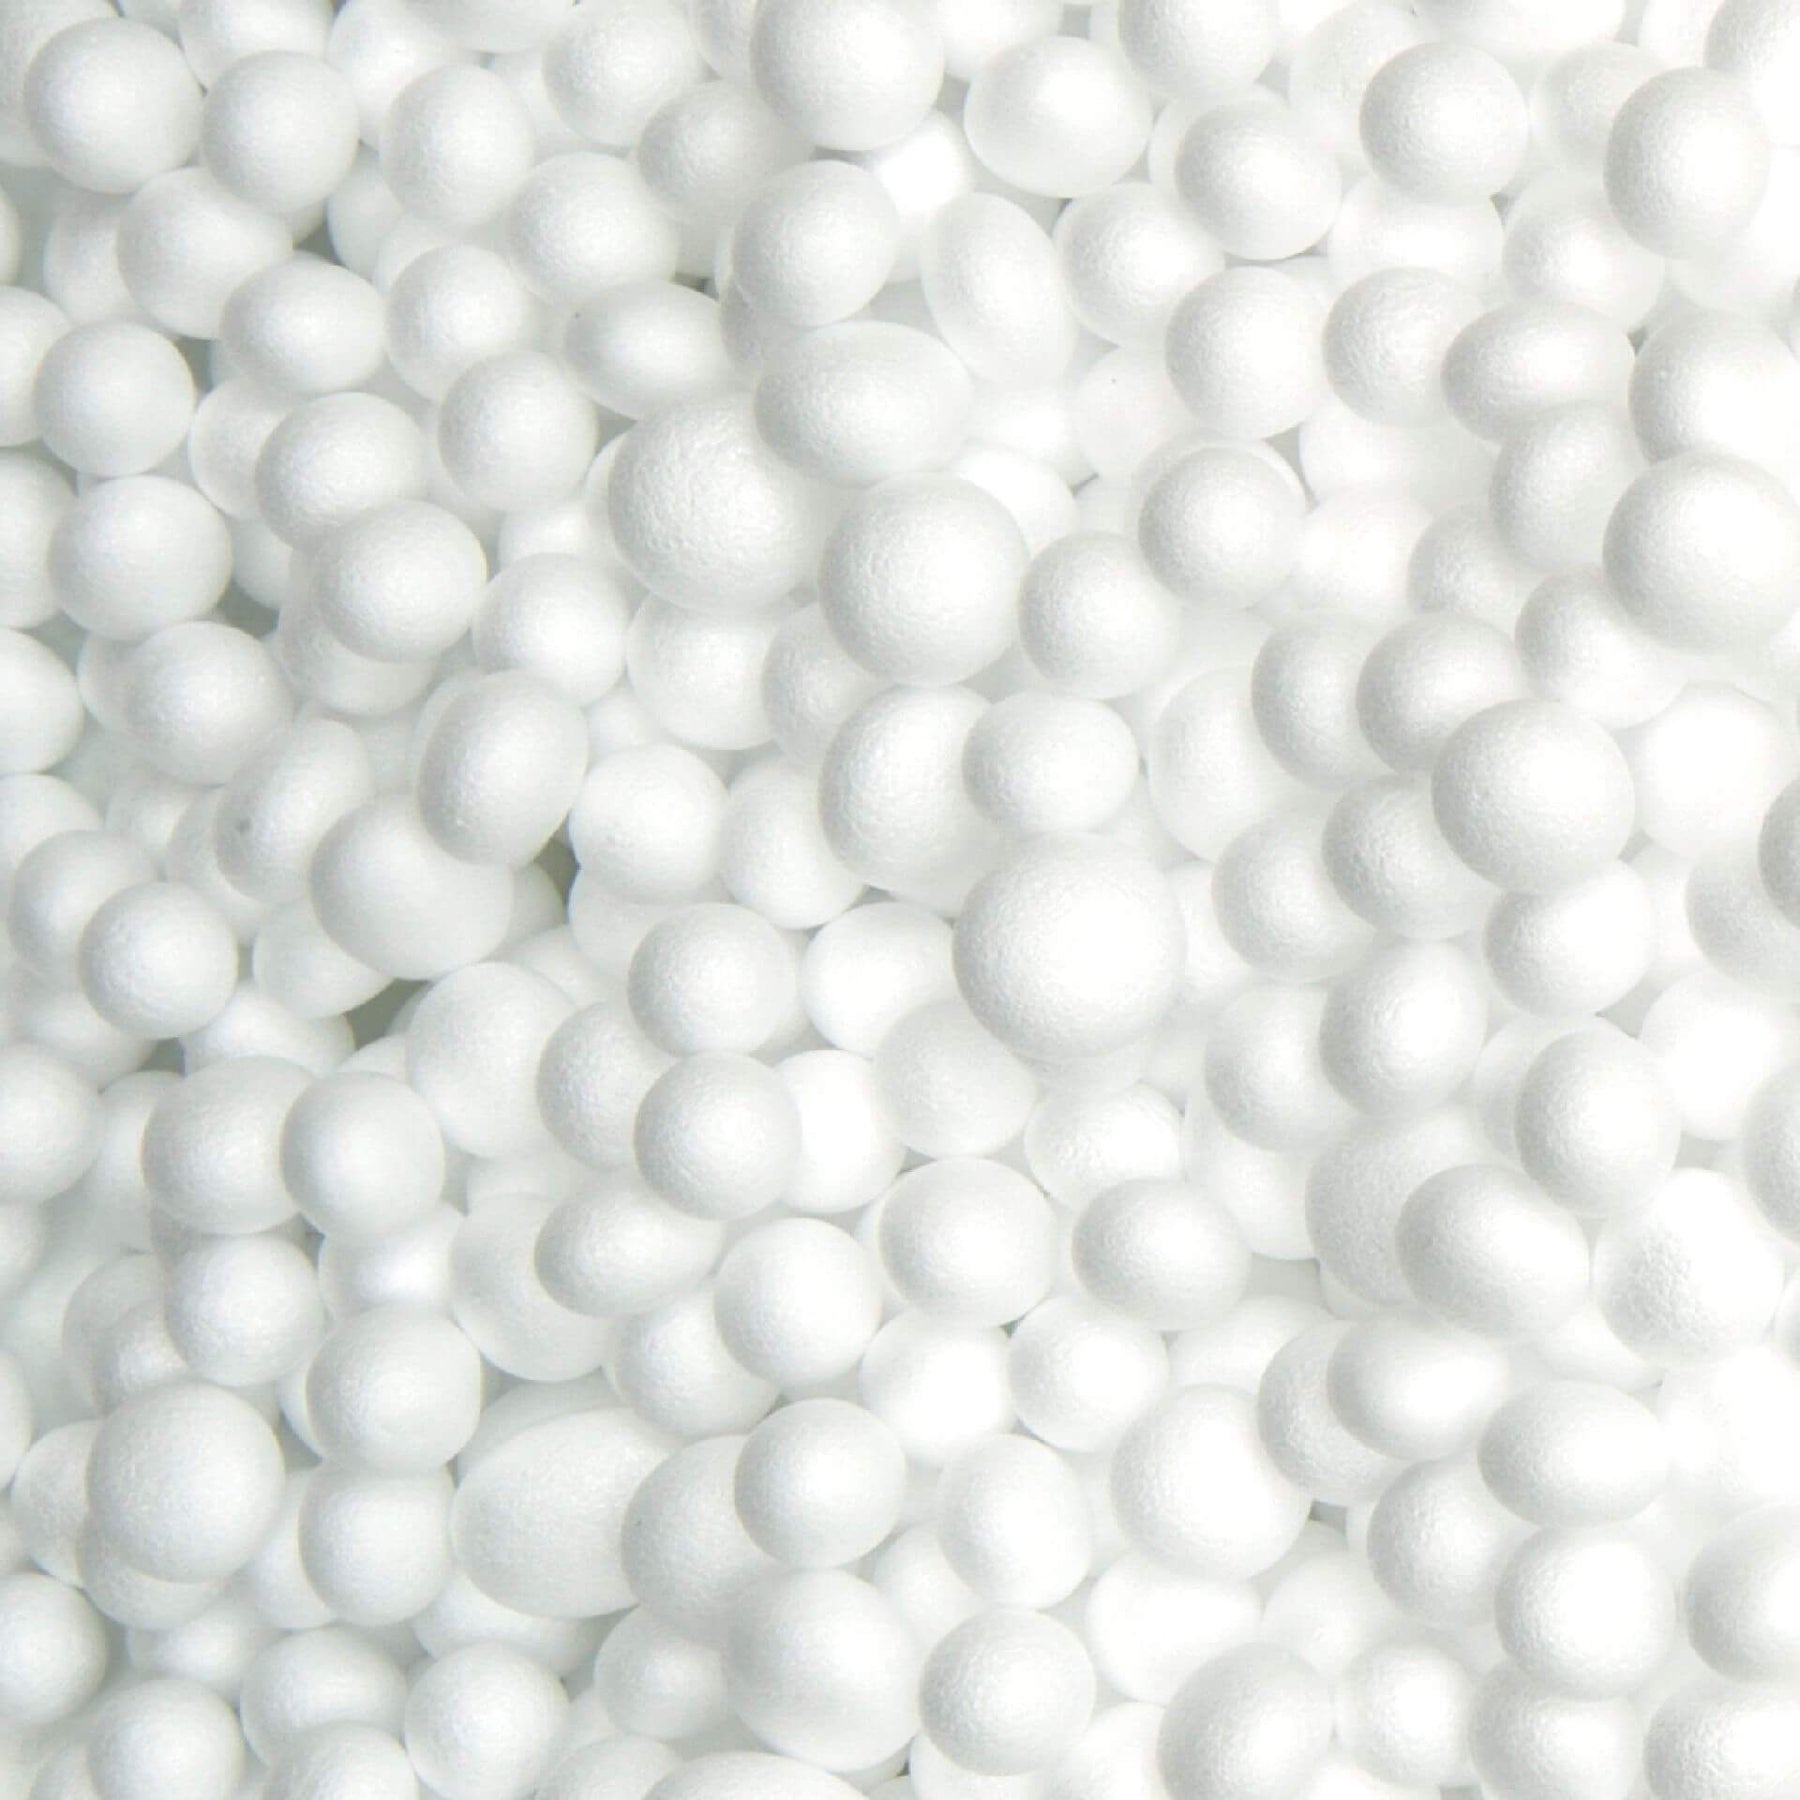  Chill Sack Foam Filling Bean Bag Refill for Bean Bags,  Loungers, and Pool Floats, 100L - 2Pk, White with EZ-Pour Zipper Spout :  Everything Else